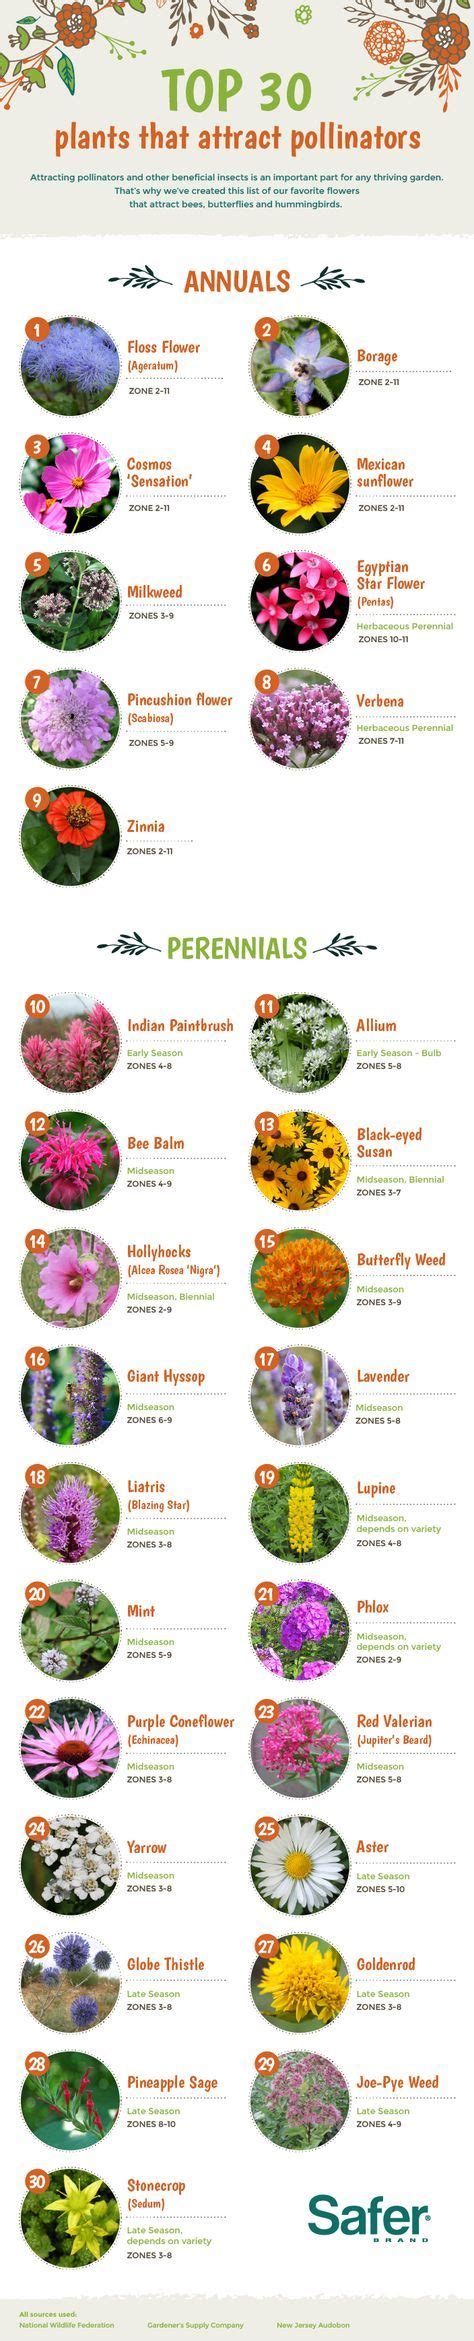 Let a hedgerow or part of your install a water garden, a bird bath or a catch basin for rain. Top 30 Plants That Attract Pollinators | Pollinator plants ...